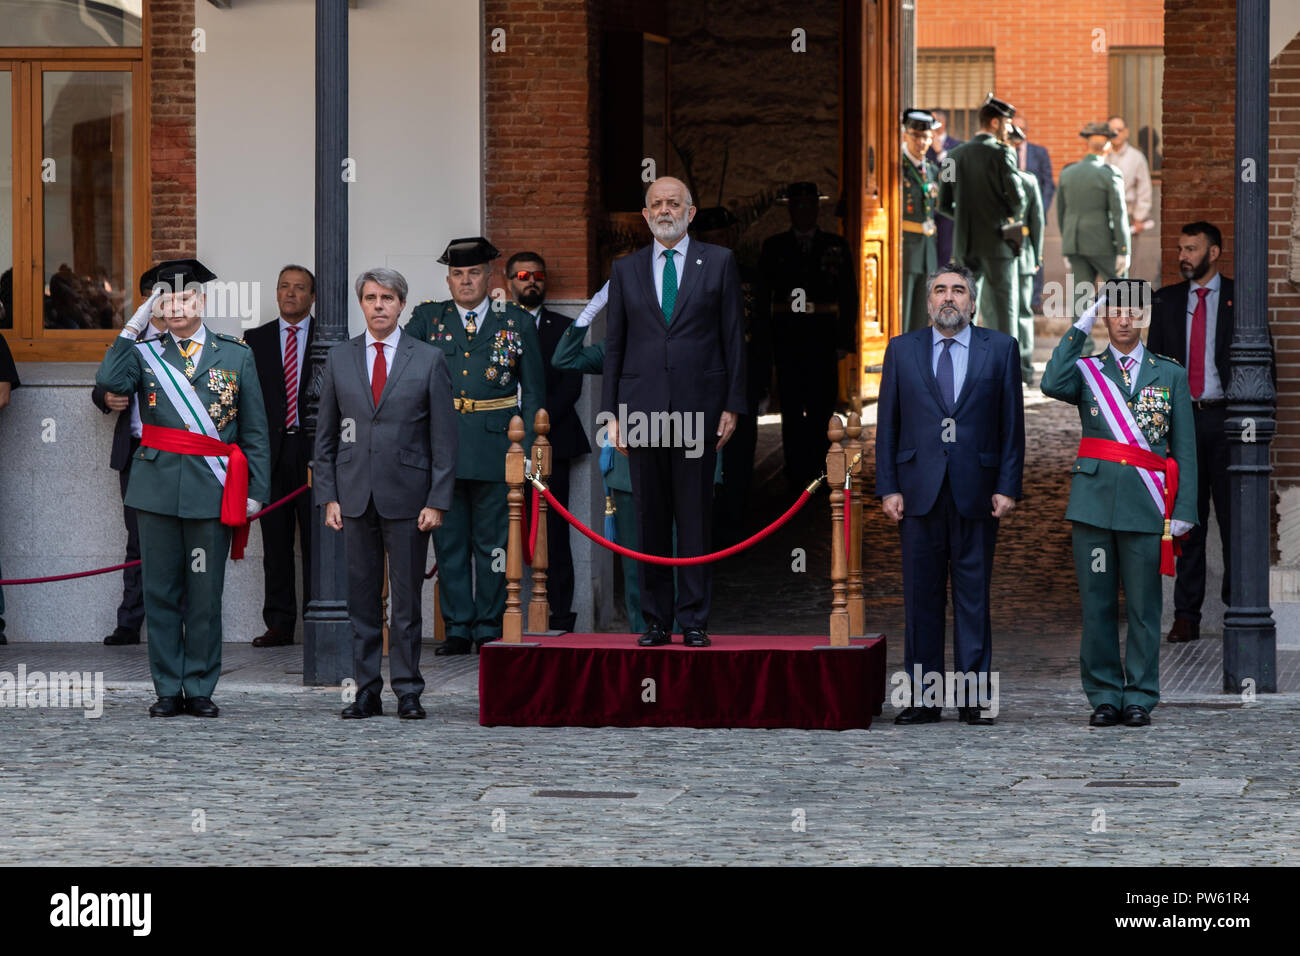 Madrid, Spain. 13th October, 2018. President of the Community of Madrid, ANGEL GARRIDO (left), General Director of the Guardia Civil, FELIX AZON and Delegate of the Government in Madrid, JOSE MANUEL RODRIGUEZ URIBES(right) attends the acts of celebration of the patron saint of the 'Guardia Civil', the Virgen del Pilar. During the ceremony, awards were given to personnel of the corps and a military parade and a parade took place in which personnel of different specialties of the 'Guardia Civil' participate on Oct 13, 2018 in Madrid, Spain Stock Photo